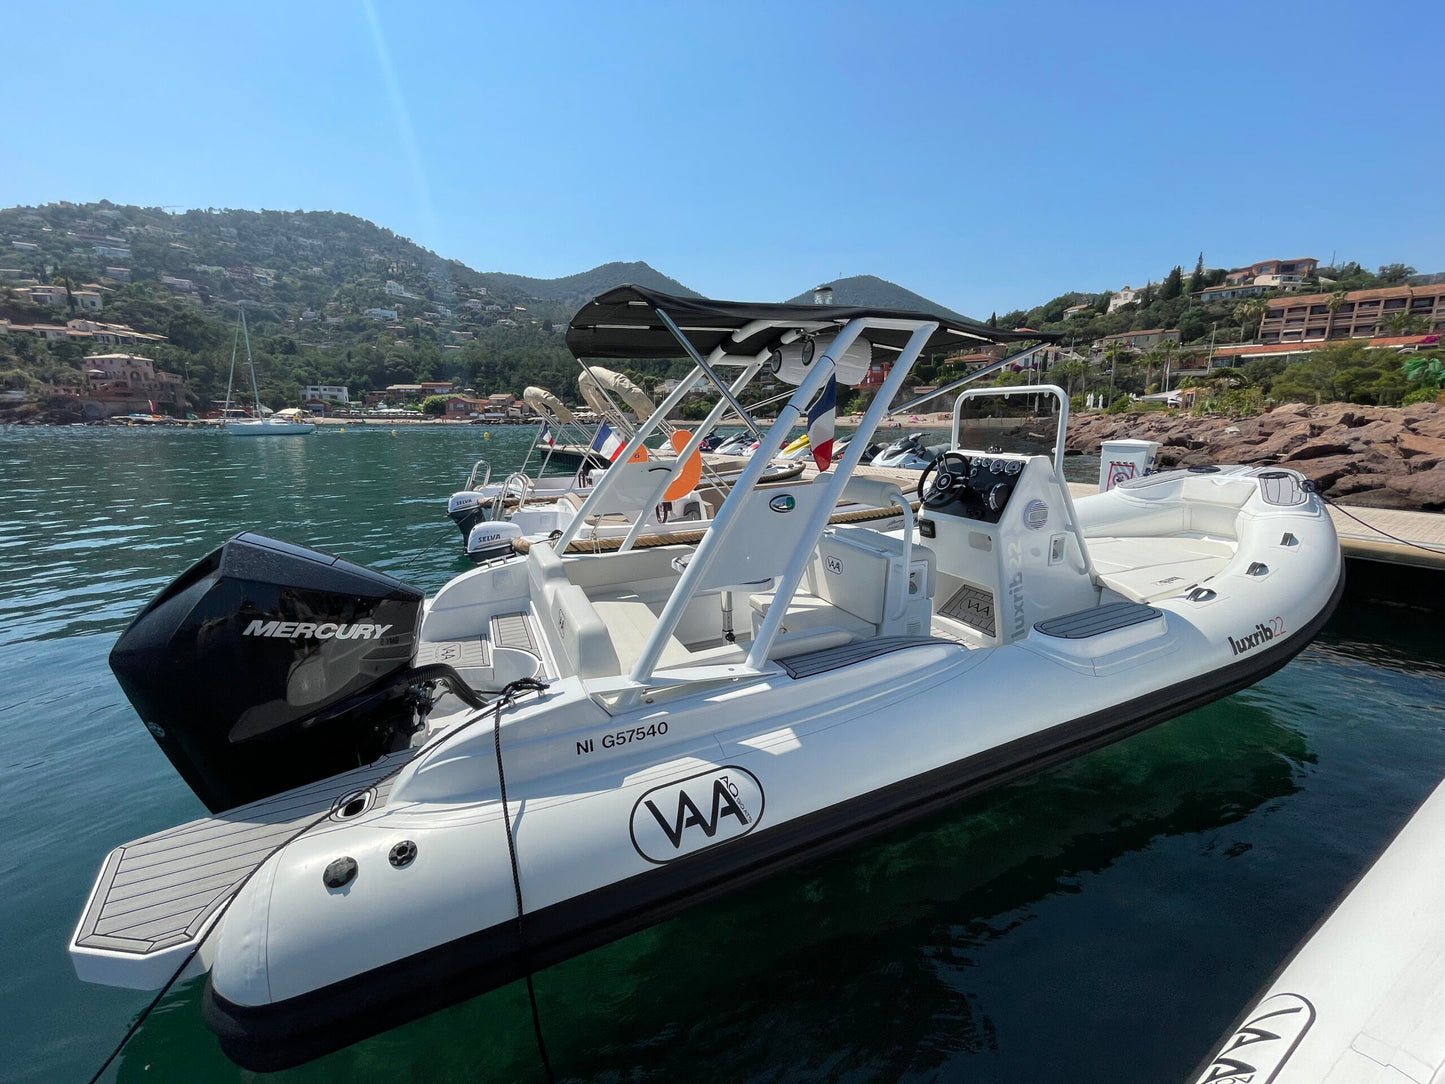 Lux Rib22 - HTWRB - Orca Carbon Off White - White Cushions - REQUEST A QUOTE -